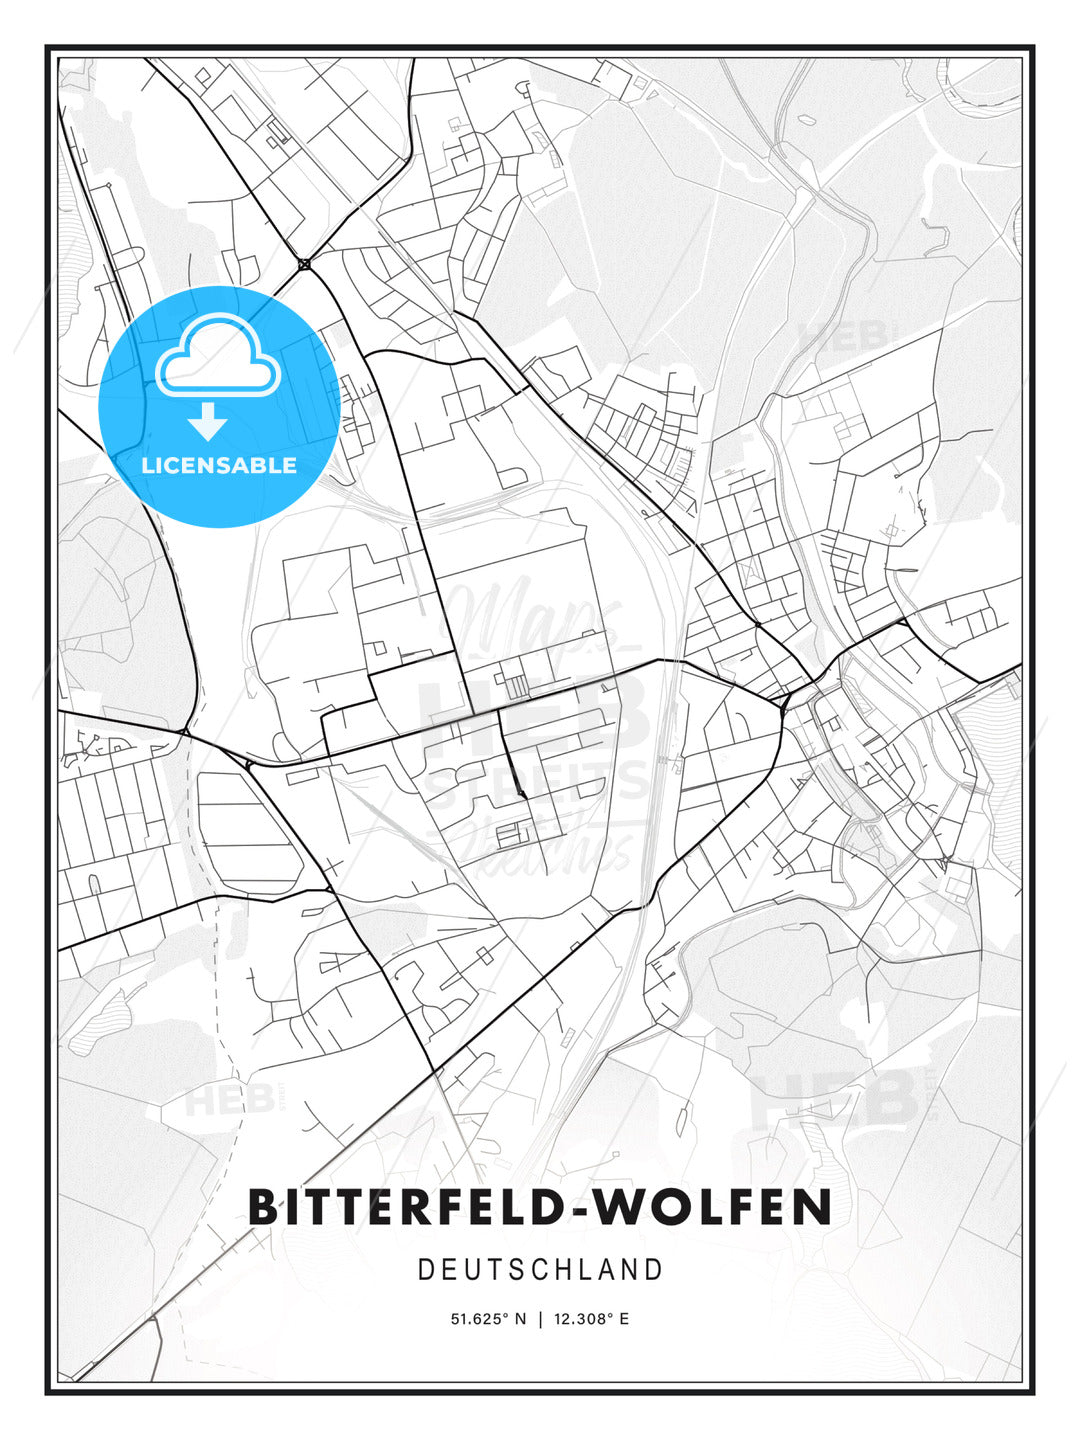 Bitterfeld-Wolfen, Germany, Modern Print Template in Various Formats - HEBSTREITS Sketches